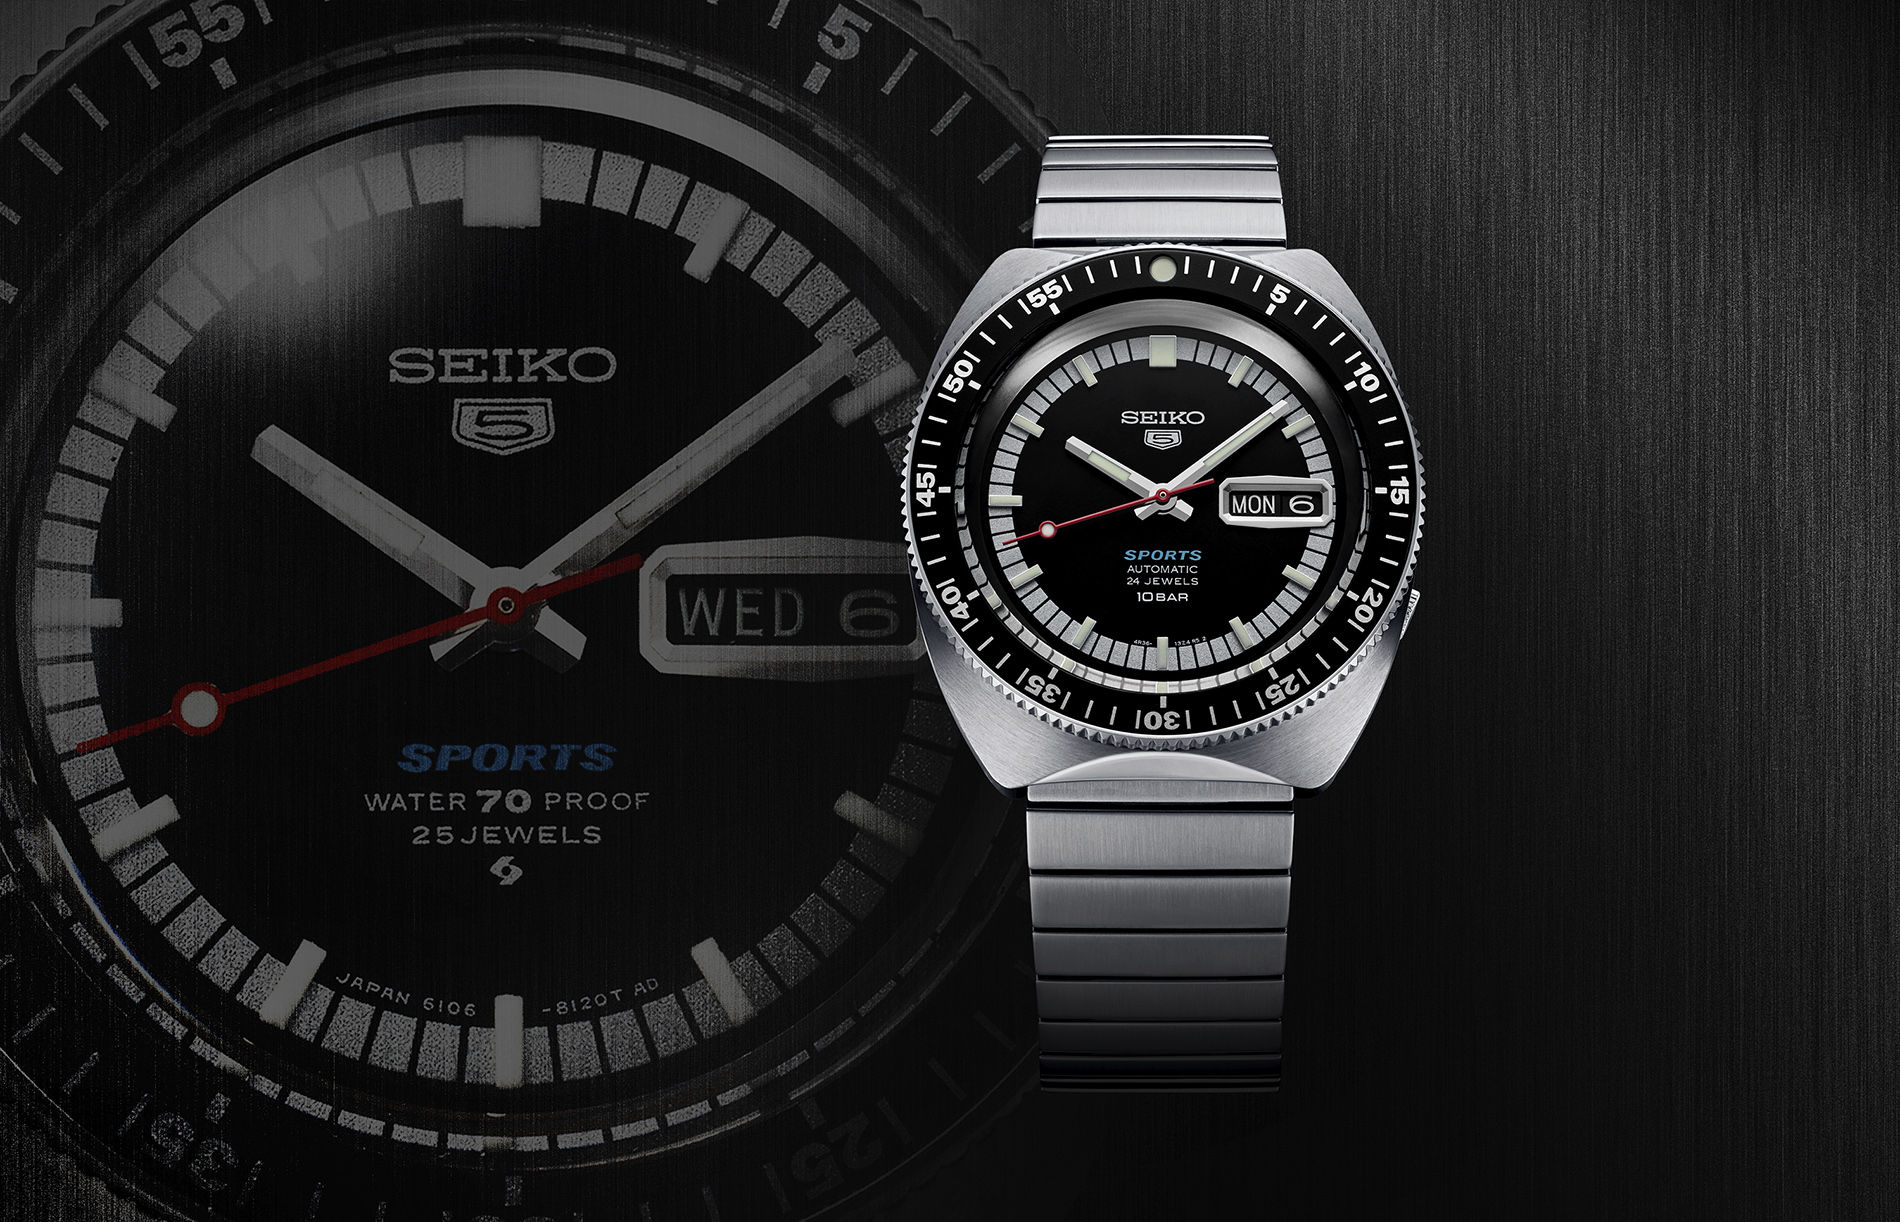 Seiko 5 Sports celebrates 55 years with four new creations paying